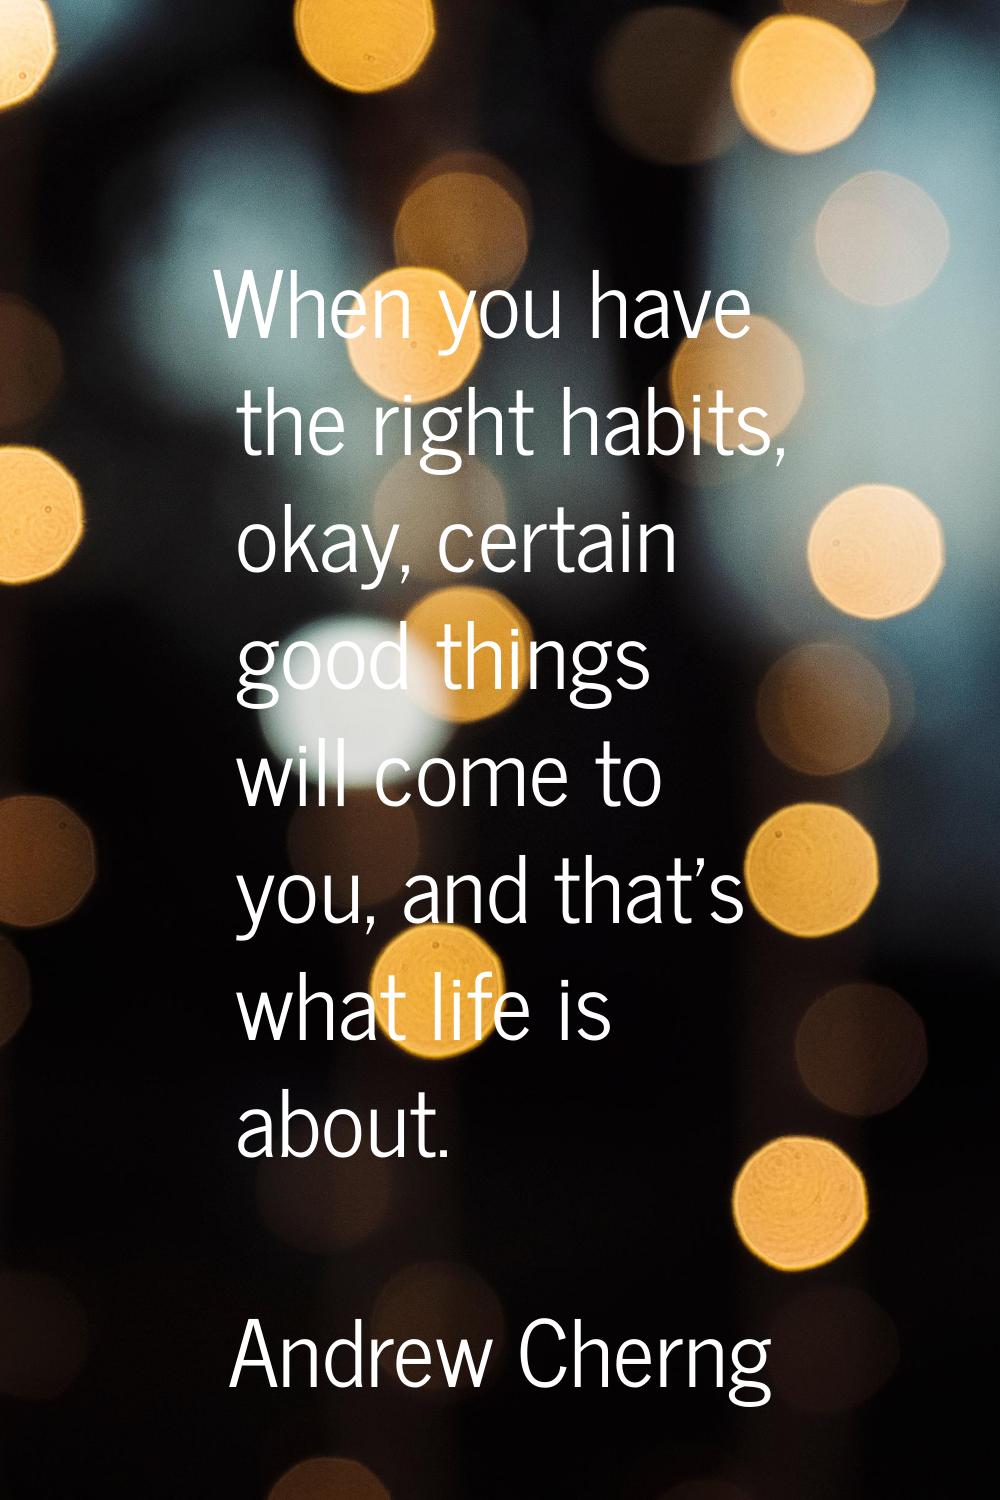 When you have the right habits, okay, certain good things will come to you, and that's what life is